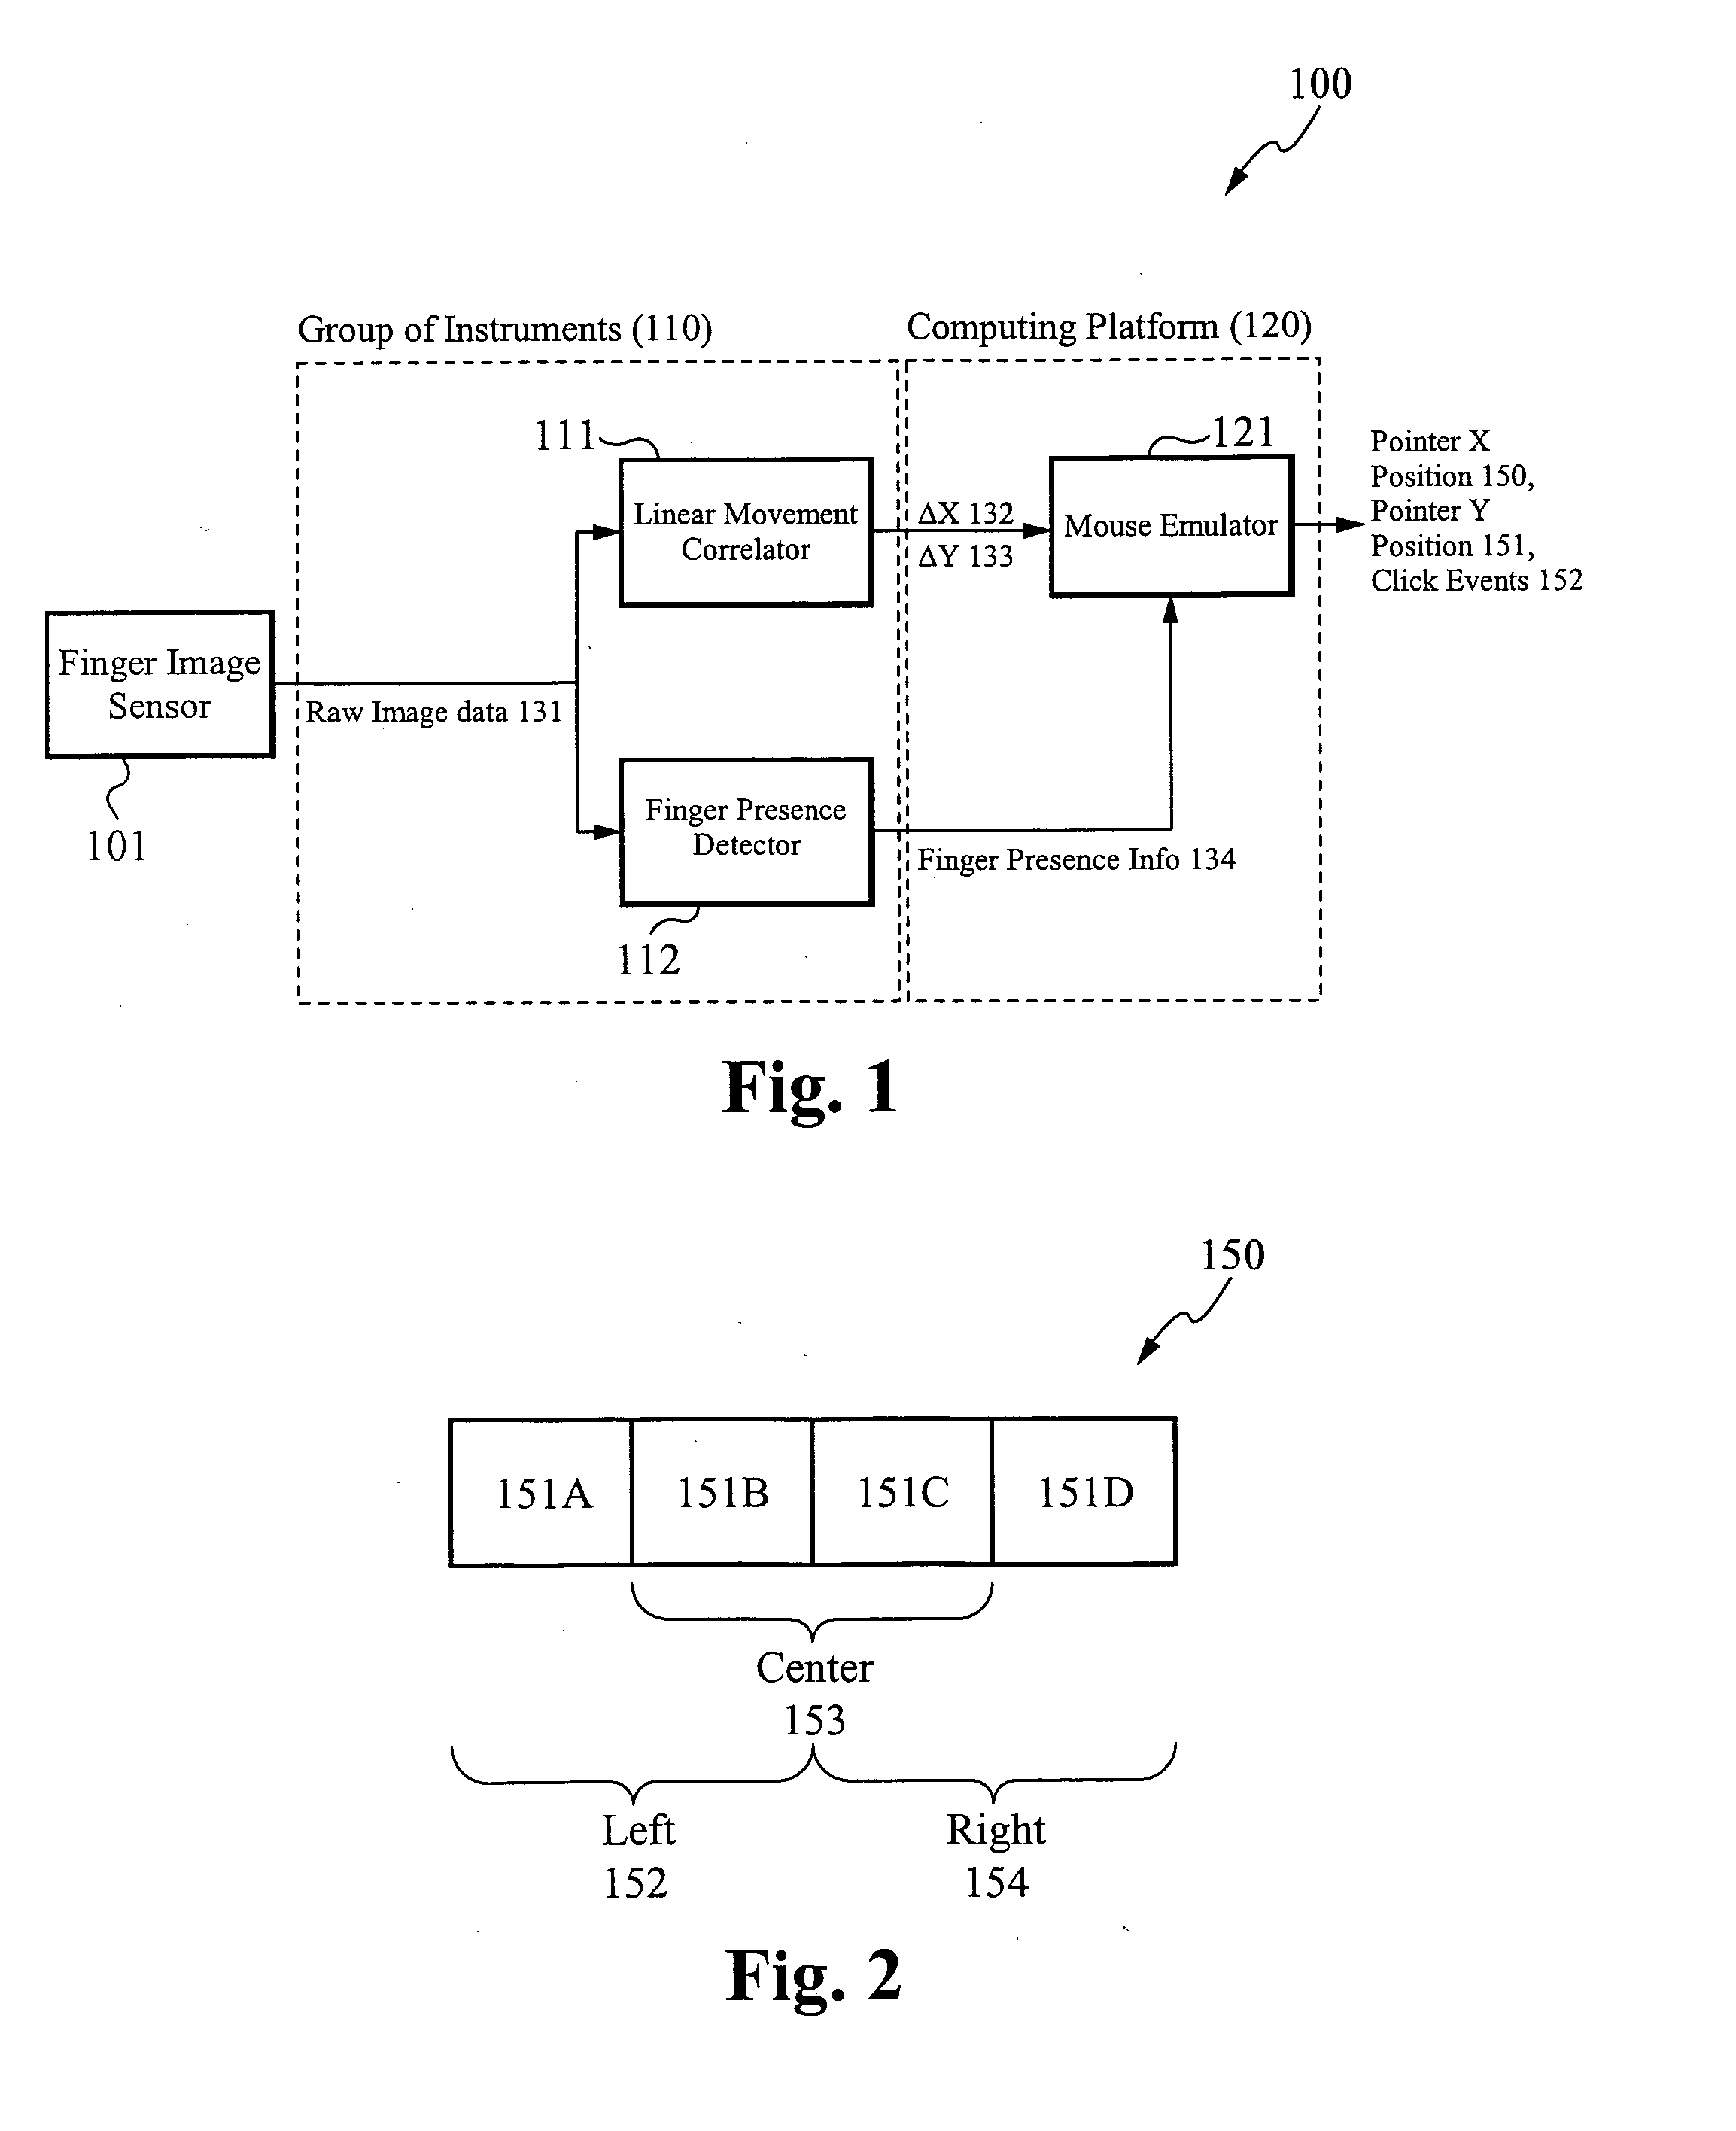 System and method of emulating mouse operations using finger image sensors